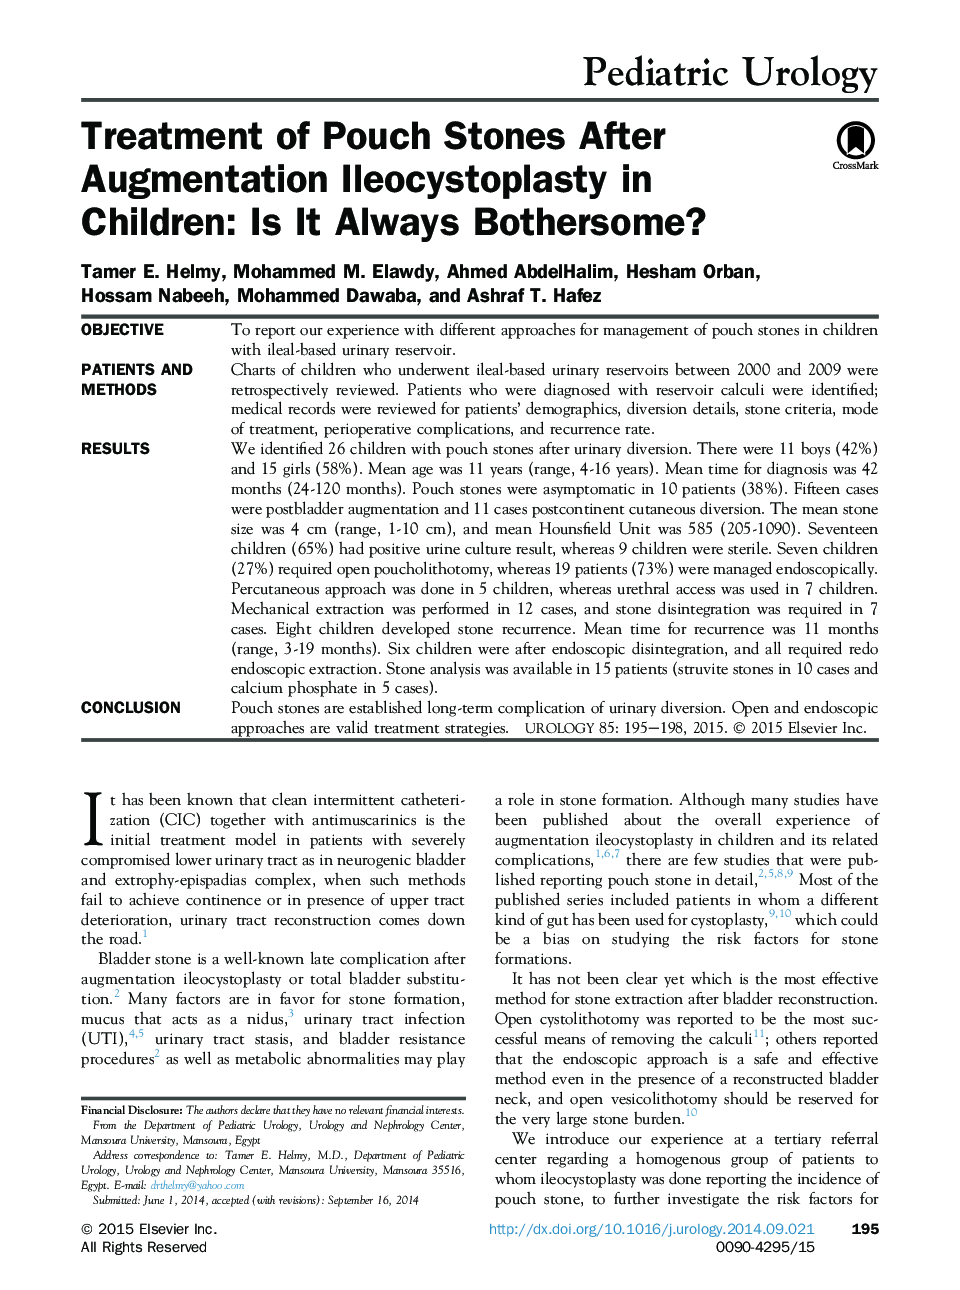 Treatment of Pouch Stones After Augmentation Ileocystoplasty in Children: Is It Always Bothersome? 